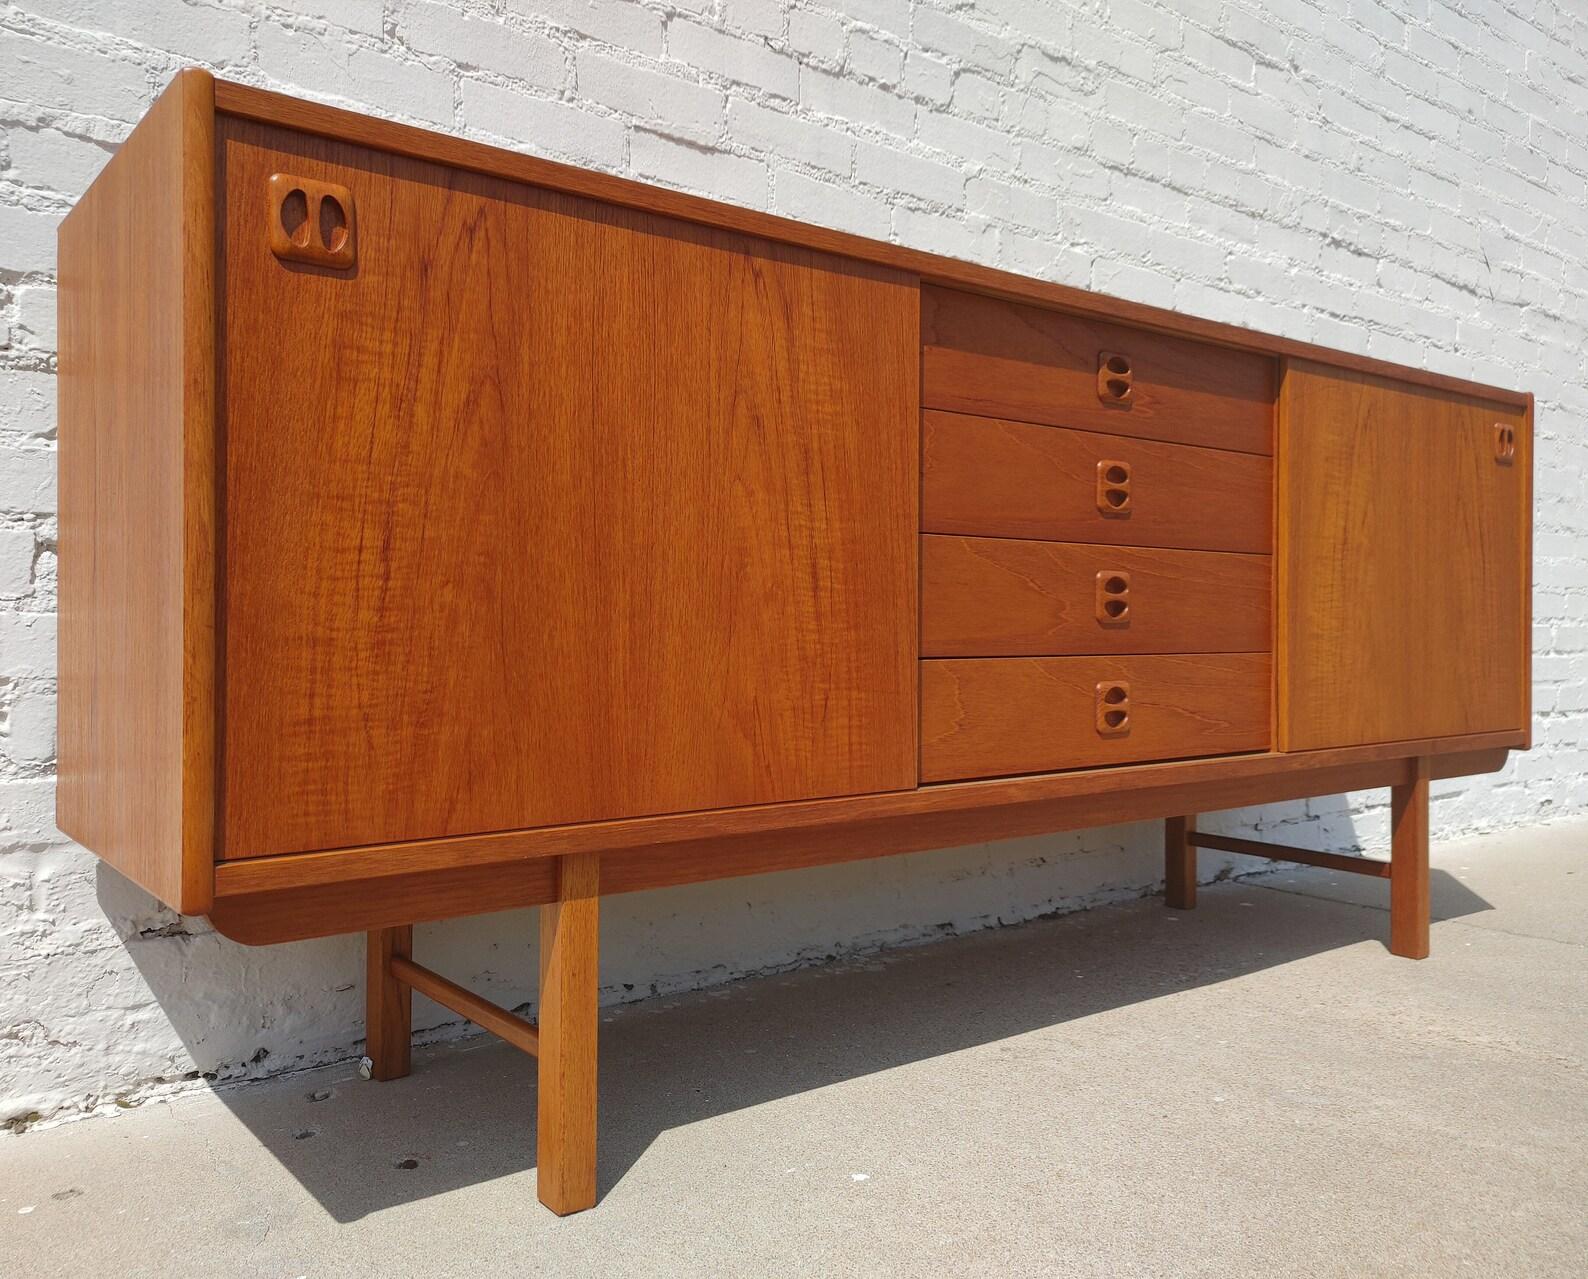 Mid Century Modern Scandinavian Teak Credenza

Above average vintage condition and structurally sound. Has some expected slight finish wear and scratching.

Additional information:
Materials: Teak
Vintage from the 1960s
Dimensions: 72  W x 16.5  D x